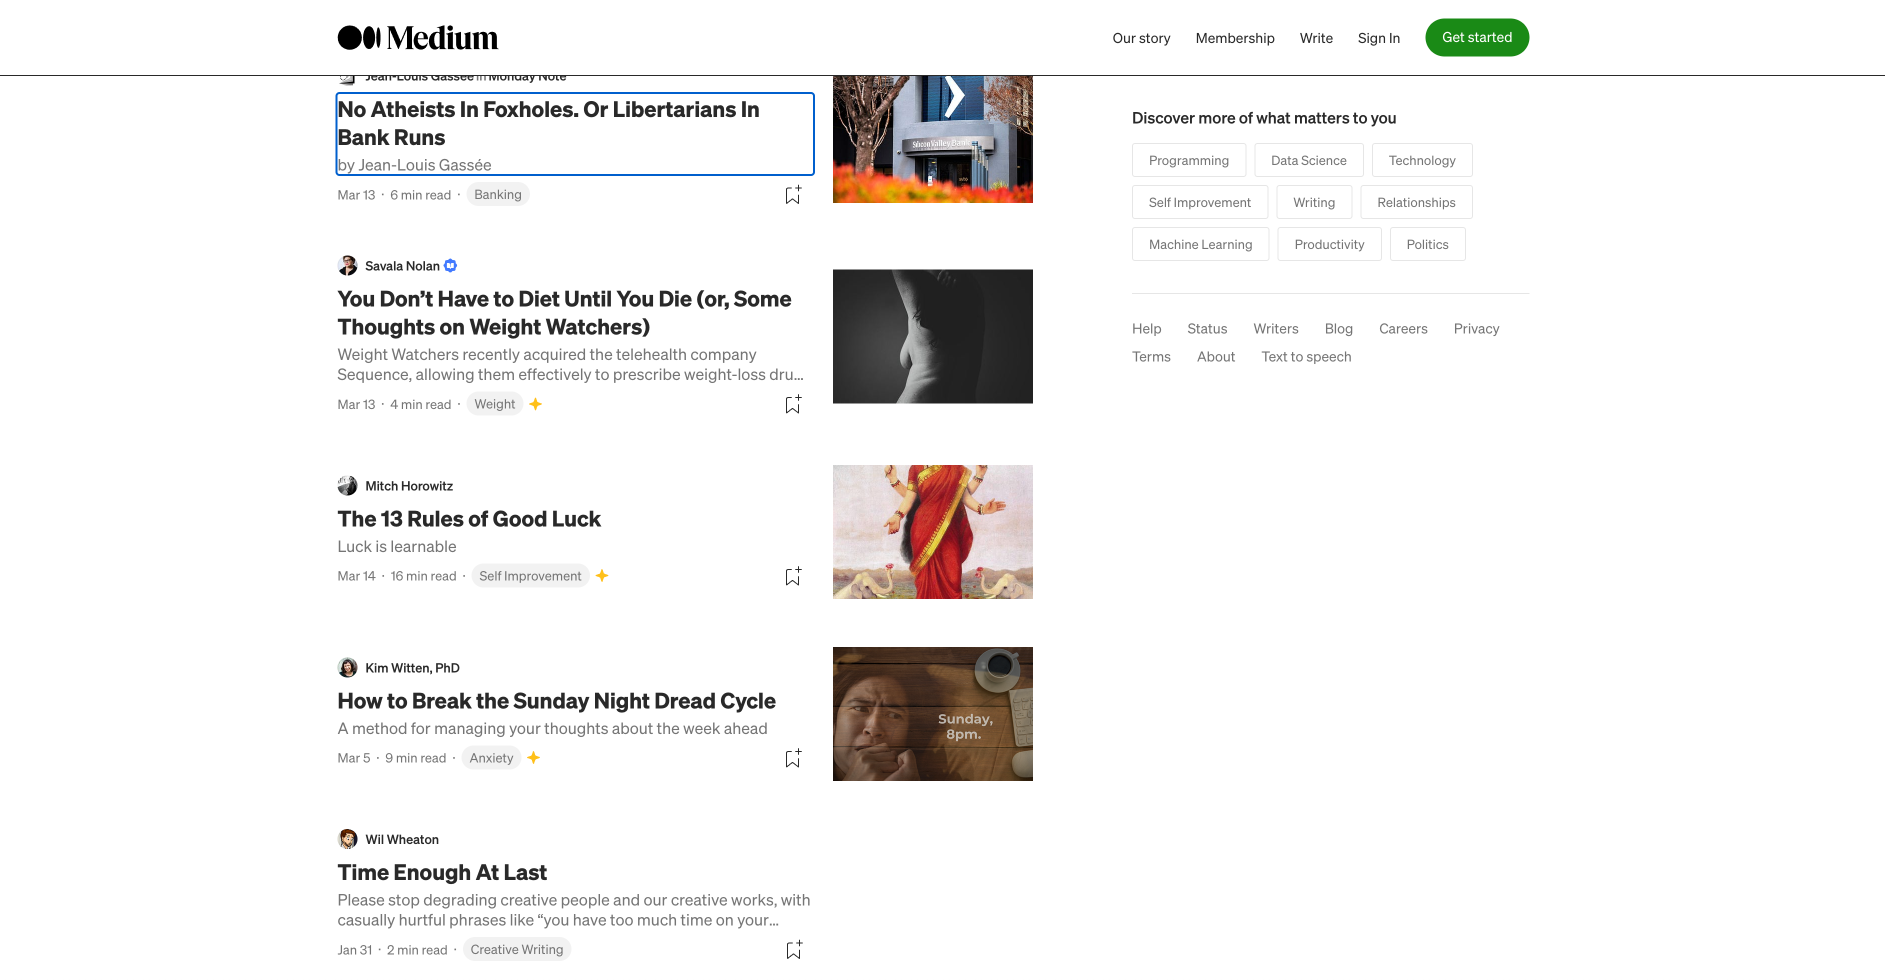 Medium’s article list with a focused heading appears visually close to the top of the page but is actually far away in terms of tab stops by keyboard